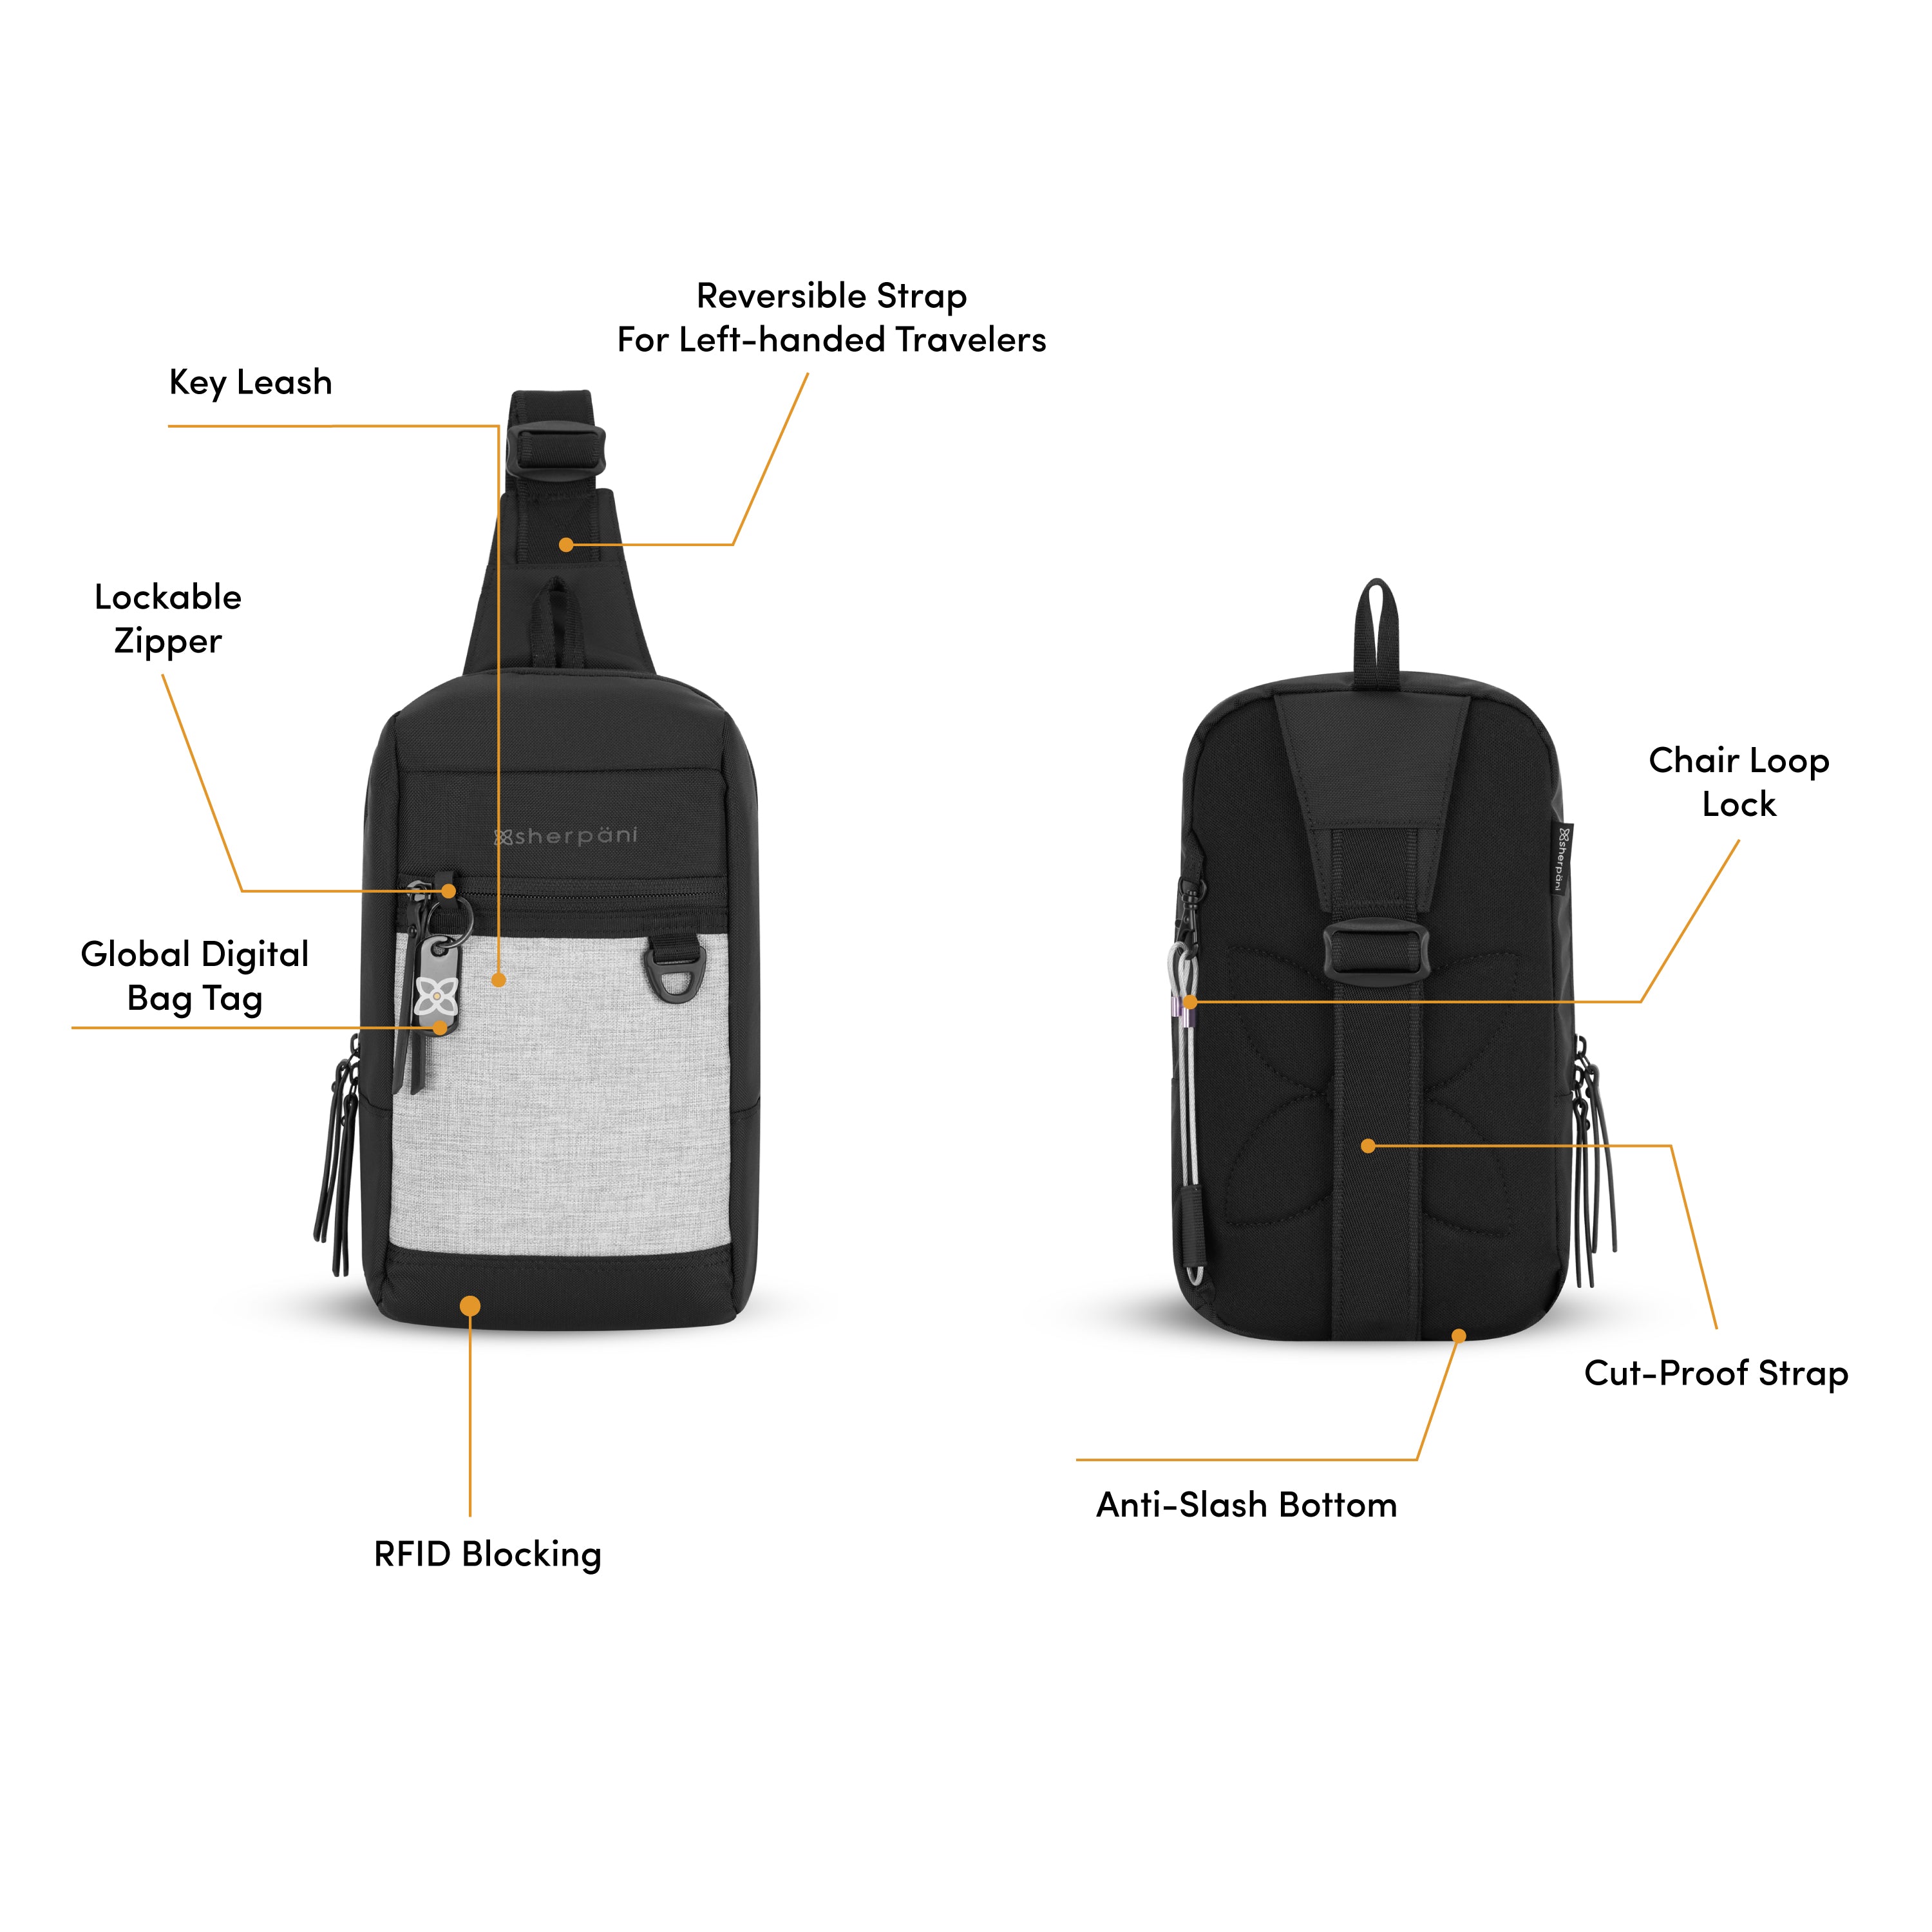 Graphic showing front and back view of the Sherpani Metro travel sling bag. Yellow circles highlight the following features: convenient key leash clip, reversible design for left-handed sling bag, zipper lock, ReturnMe Tag, RFID-blocking technology, Anti-Theft chair lock, uncuttable crossbody strap, slash-proof bottom. 